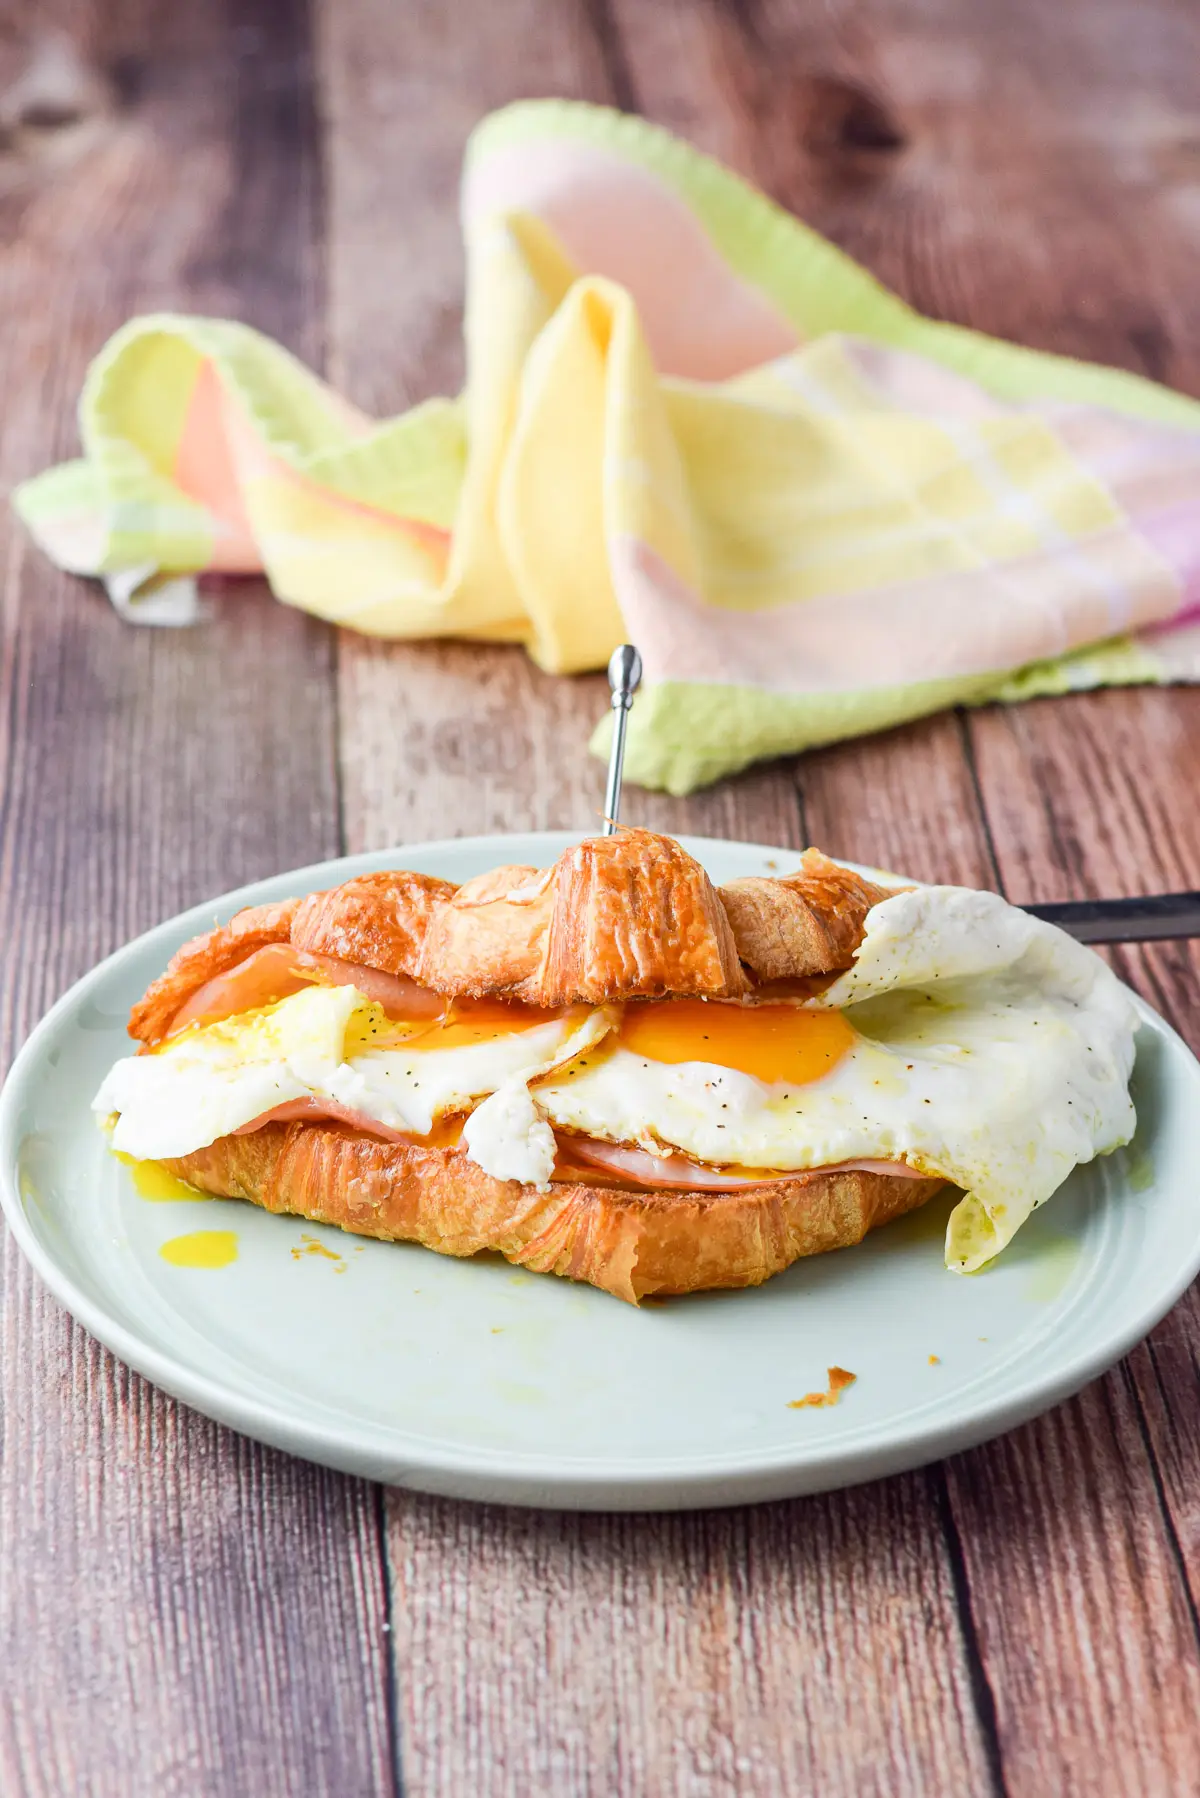 Eggs on a croissant with ham and cheese. There is a pick holding the croissant closed